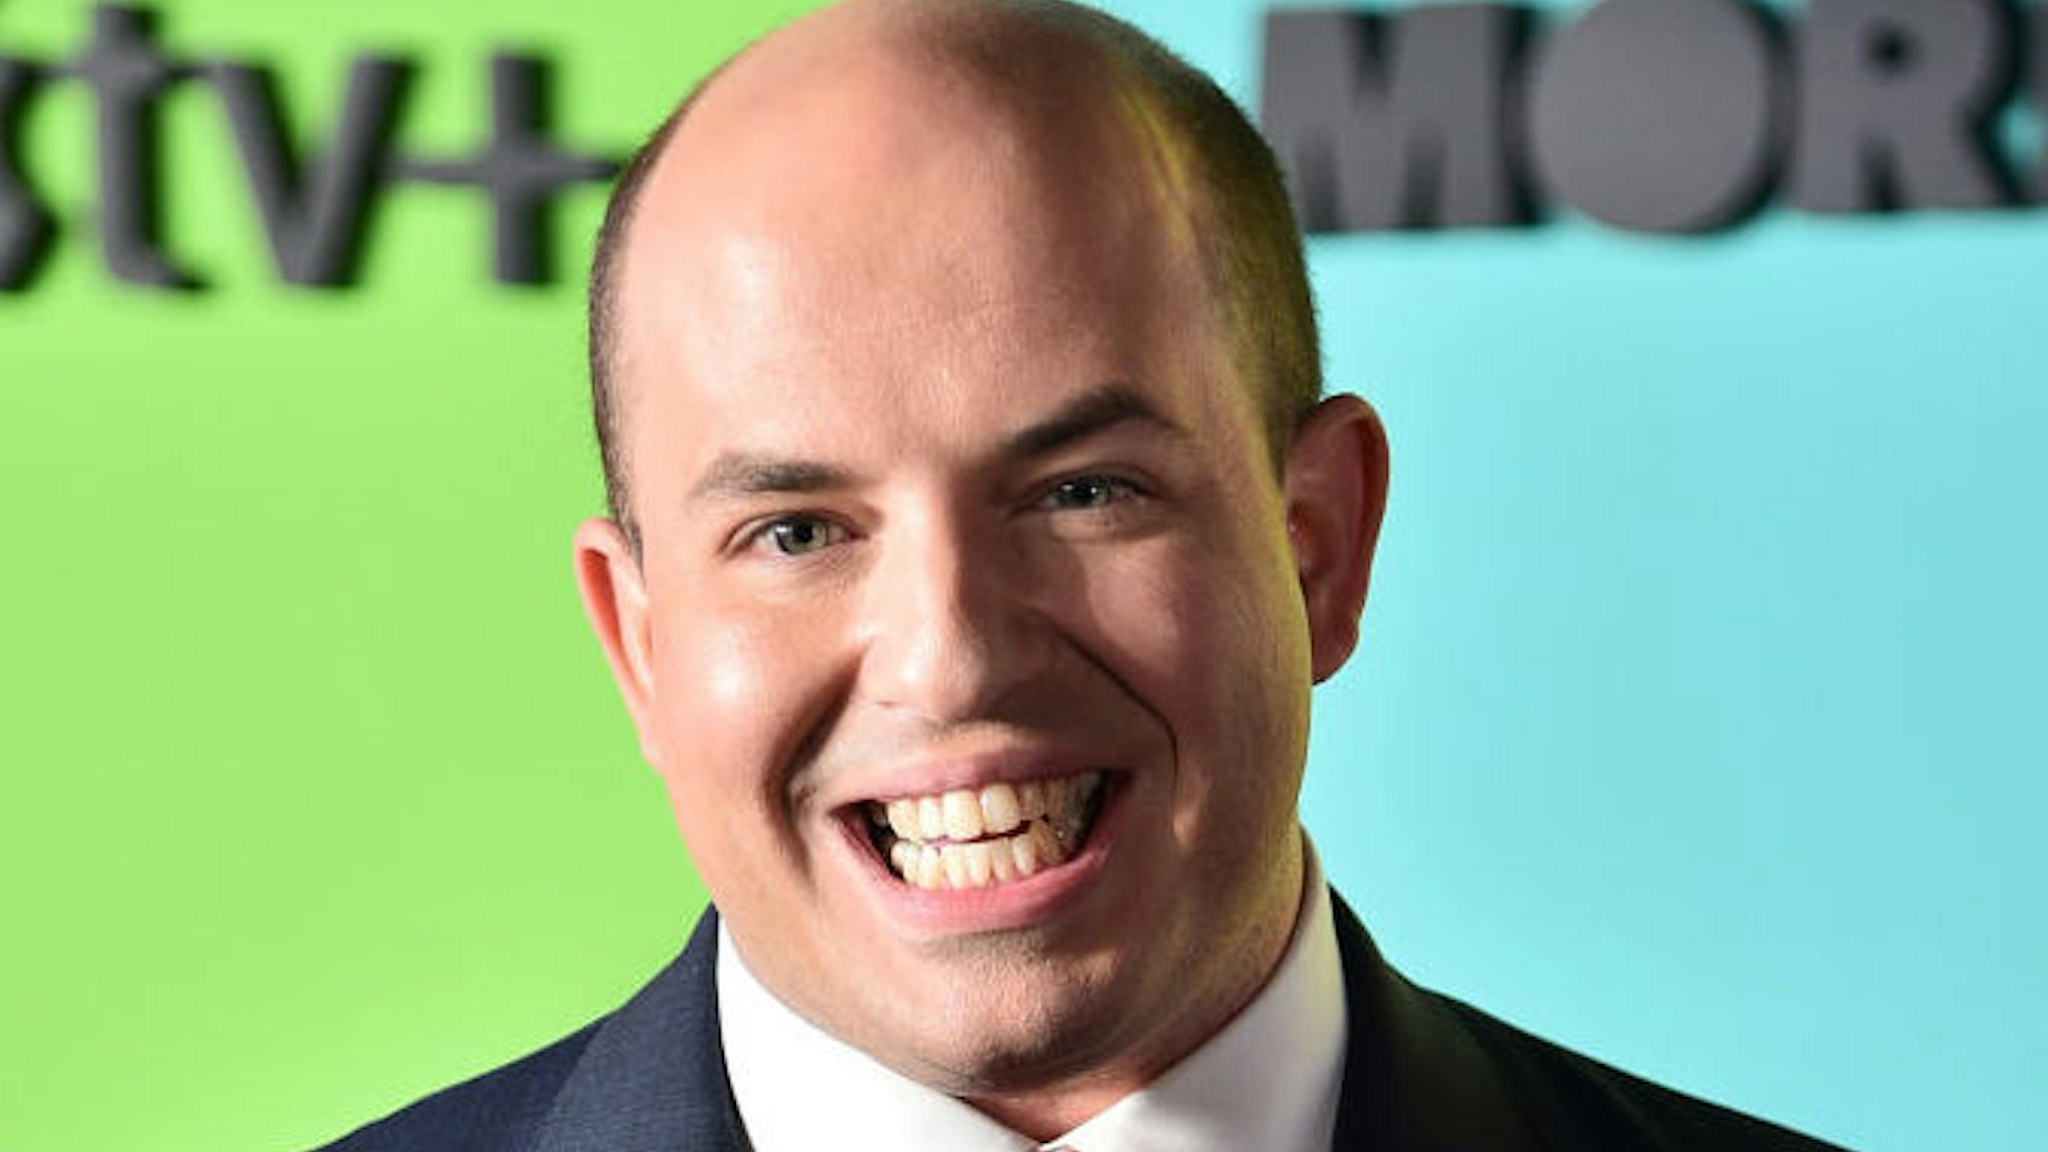 Brian Stelter attends the Apple TV+'s "The Morning Show" World Premiere at David Geffen Hall on October 28, 2019 in New York City.